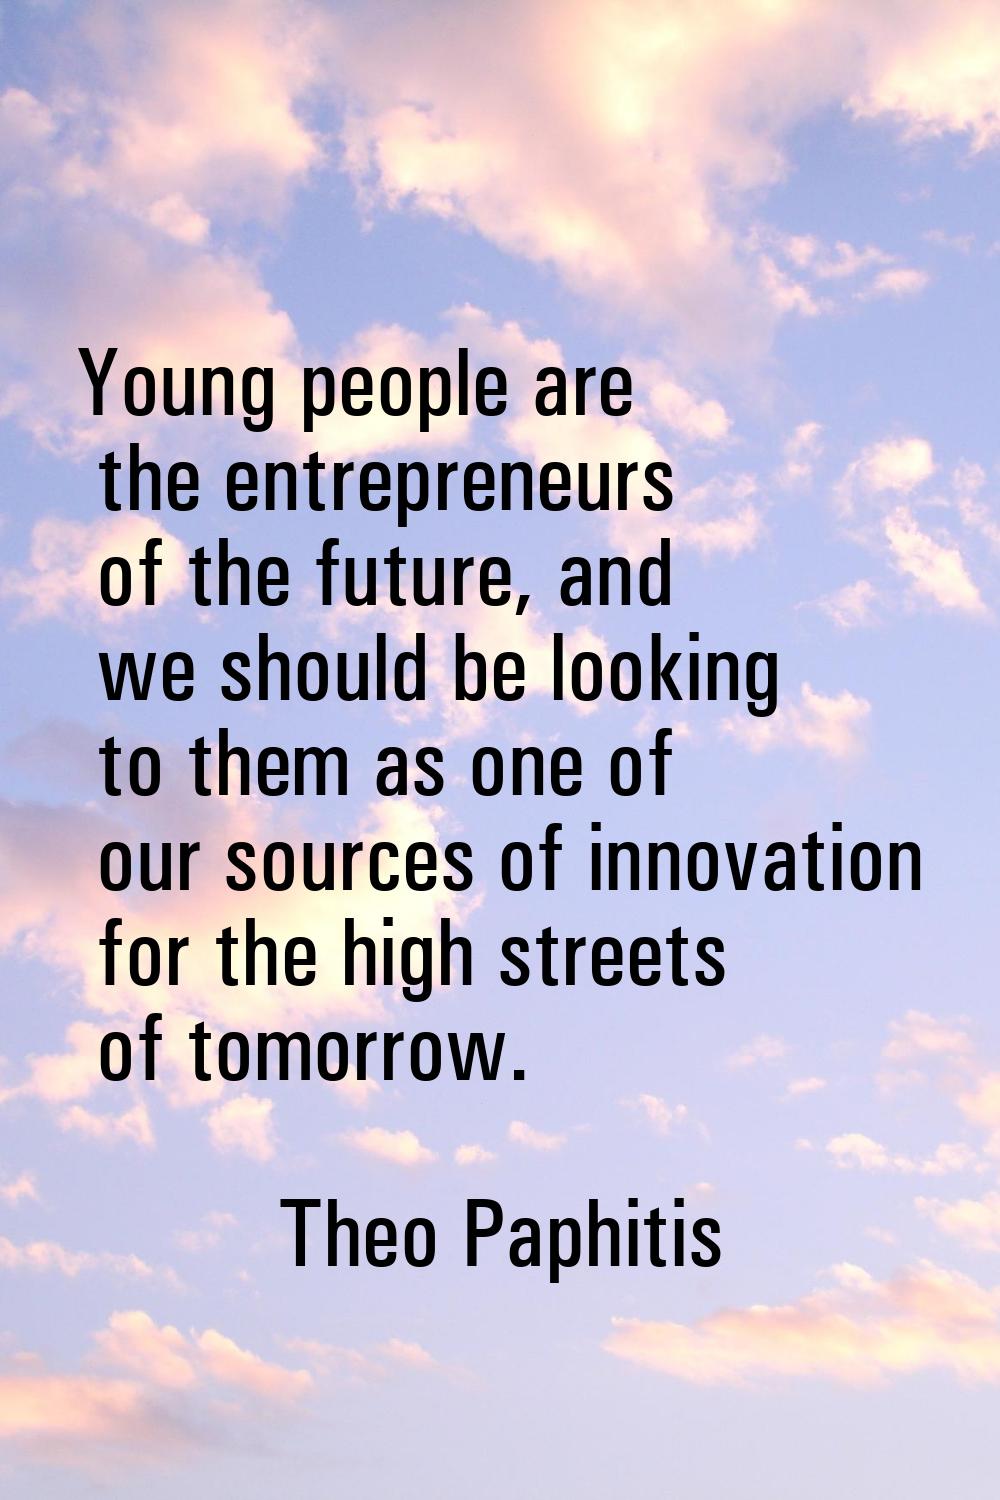 Young people are the entrepreneurs of the future, and we should be looking to them as one of our so